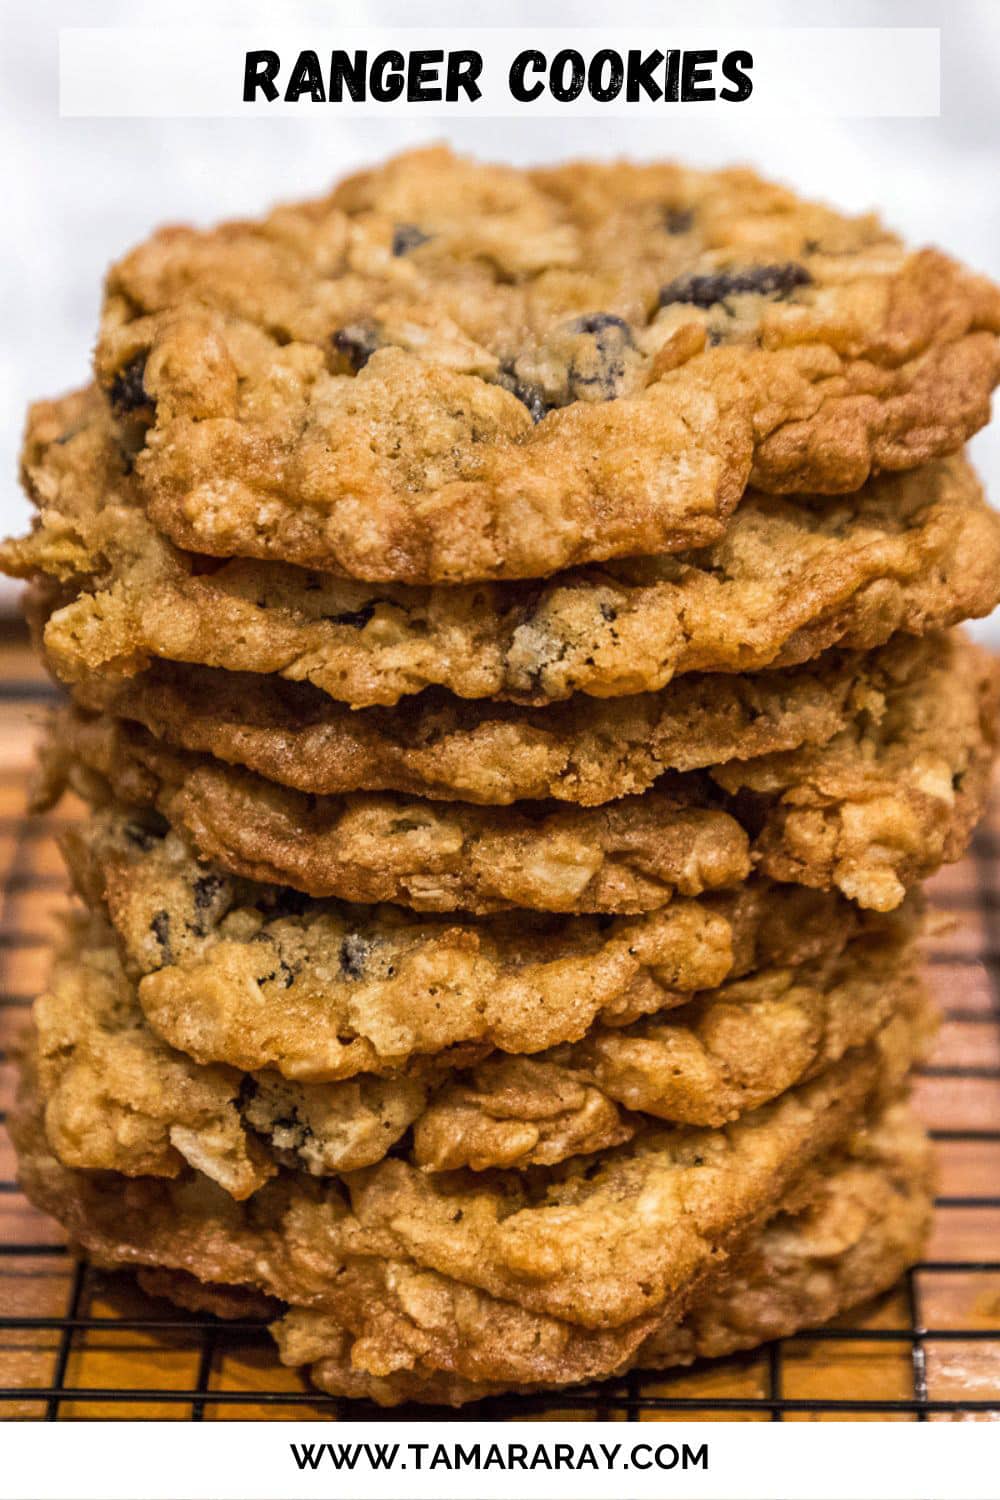 Ranger cookies recipes with oats and Krispies.